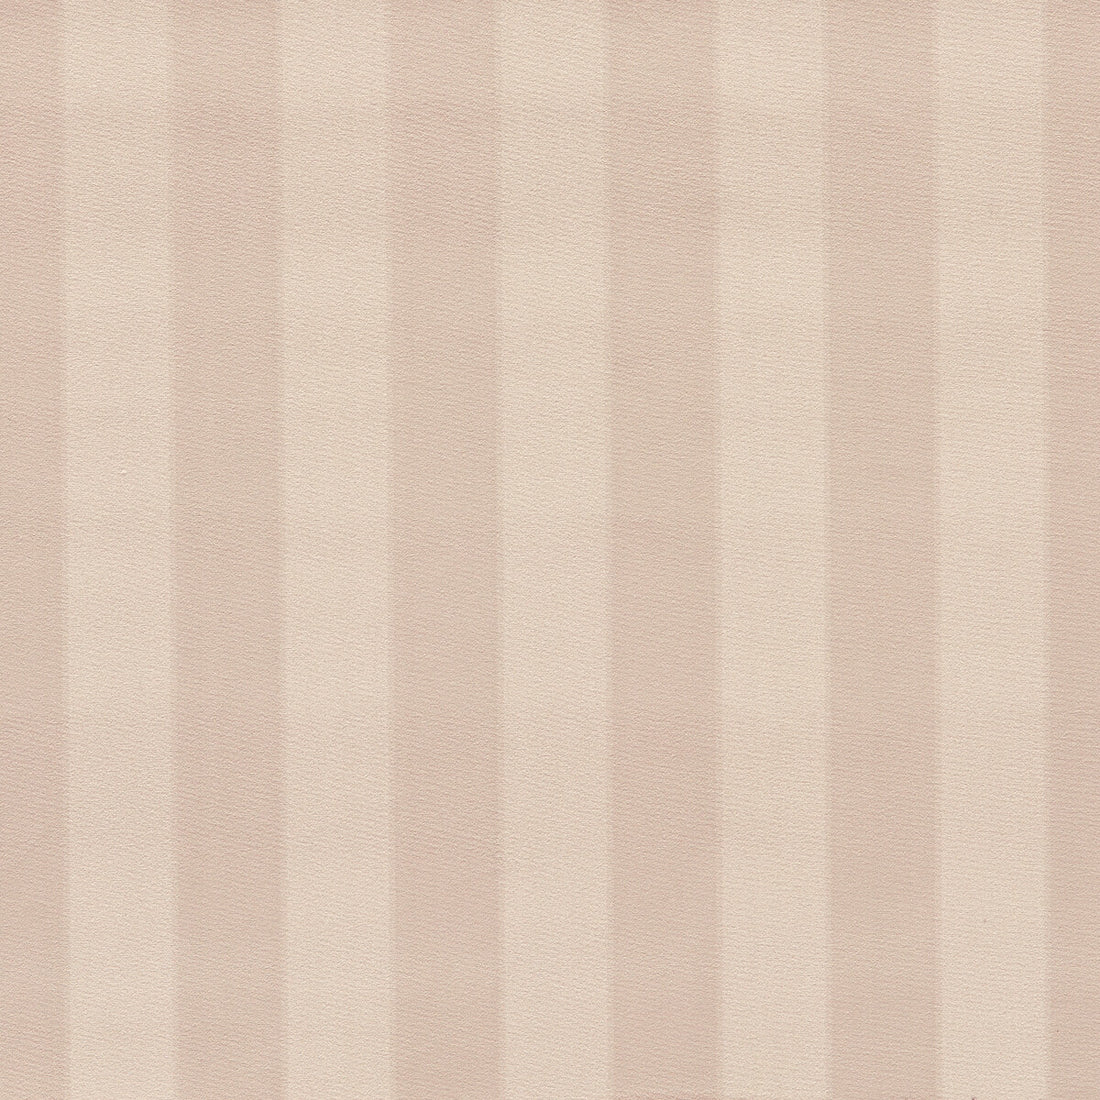 Haldon fabric in blush color - pattern F1690/02.CAC.0 - by Clarke And Clarke in the Whitworth collection